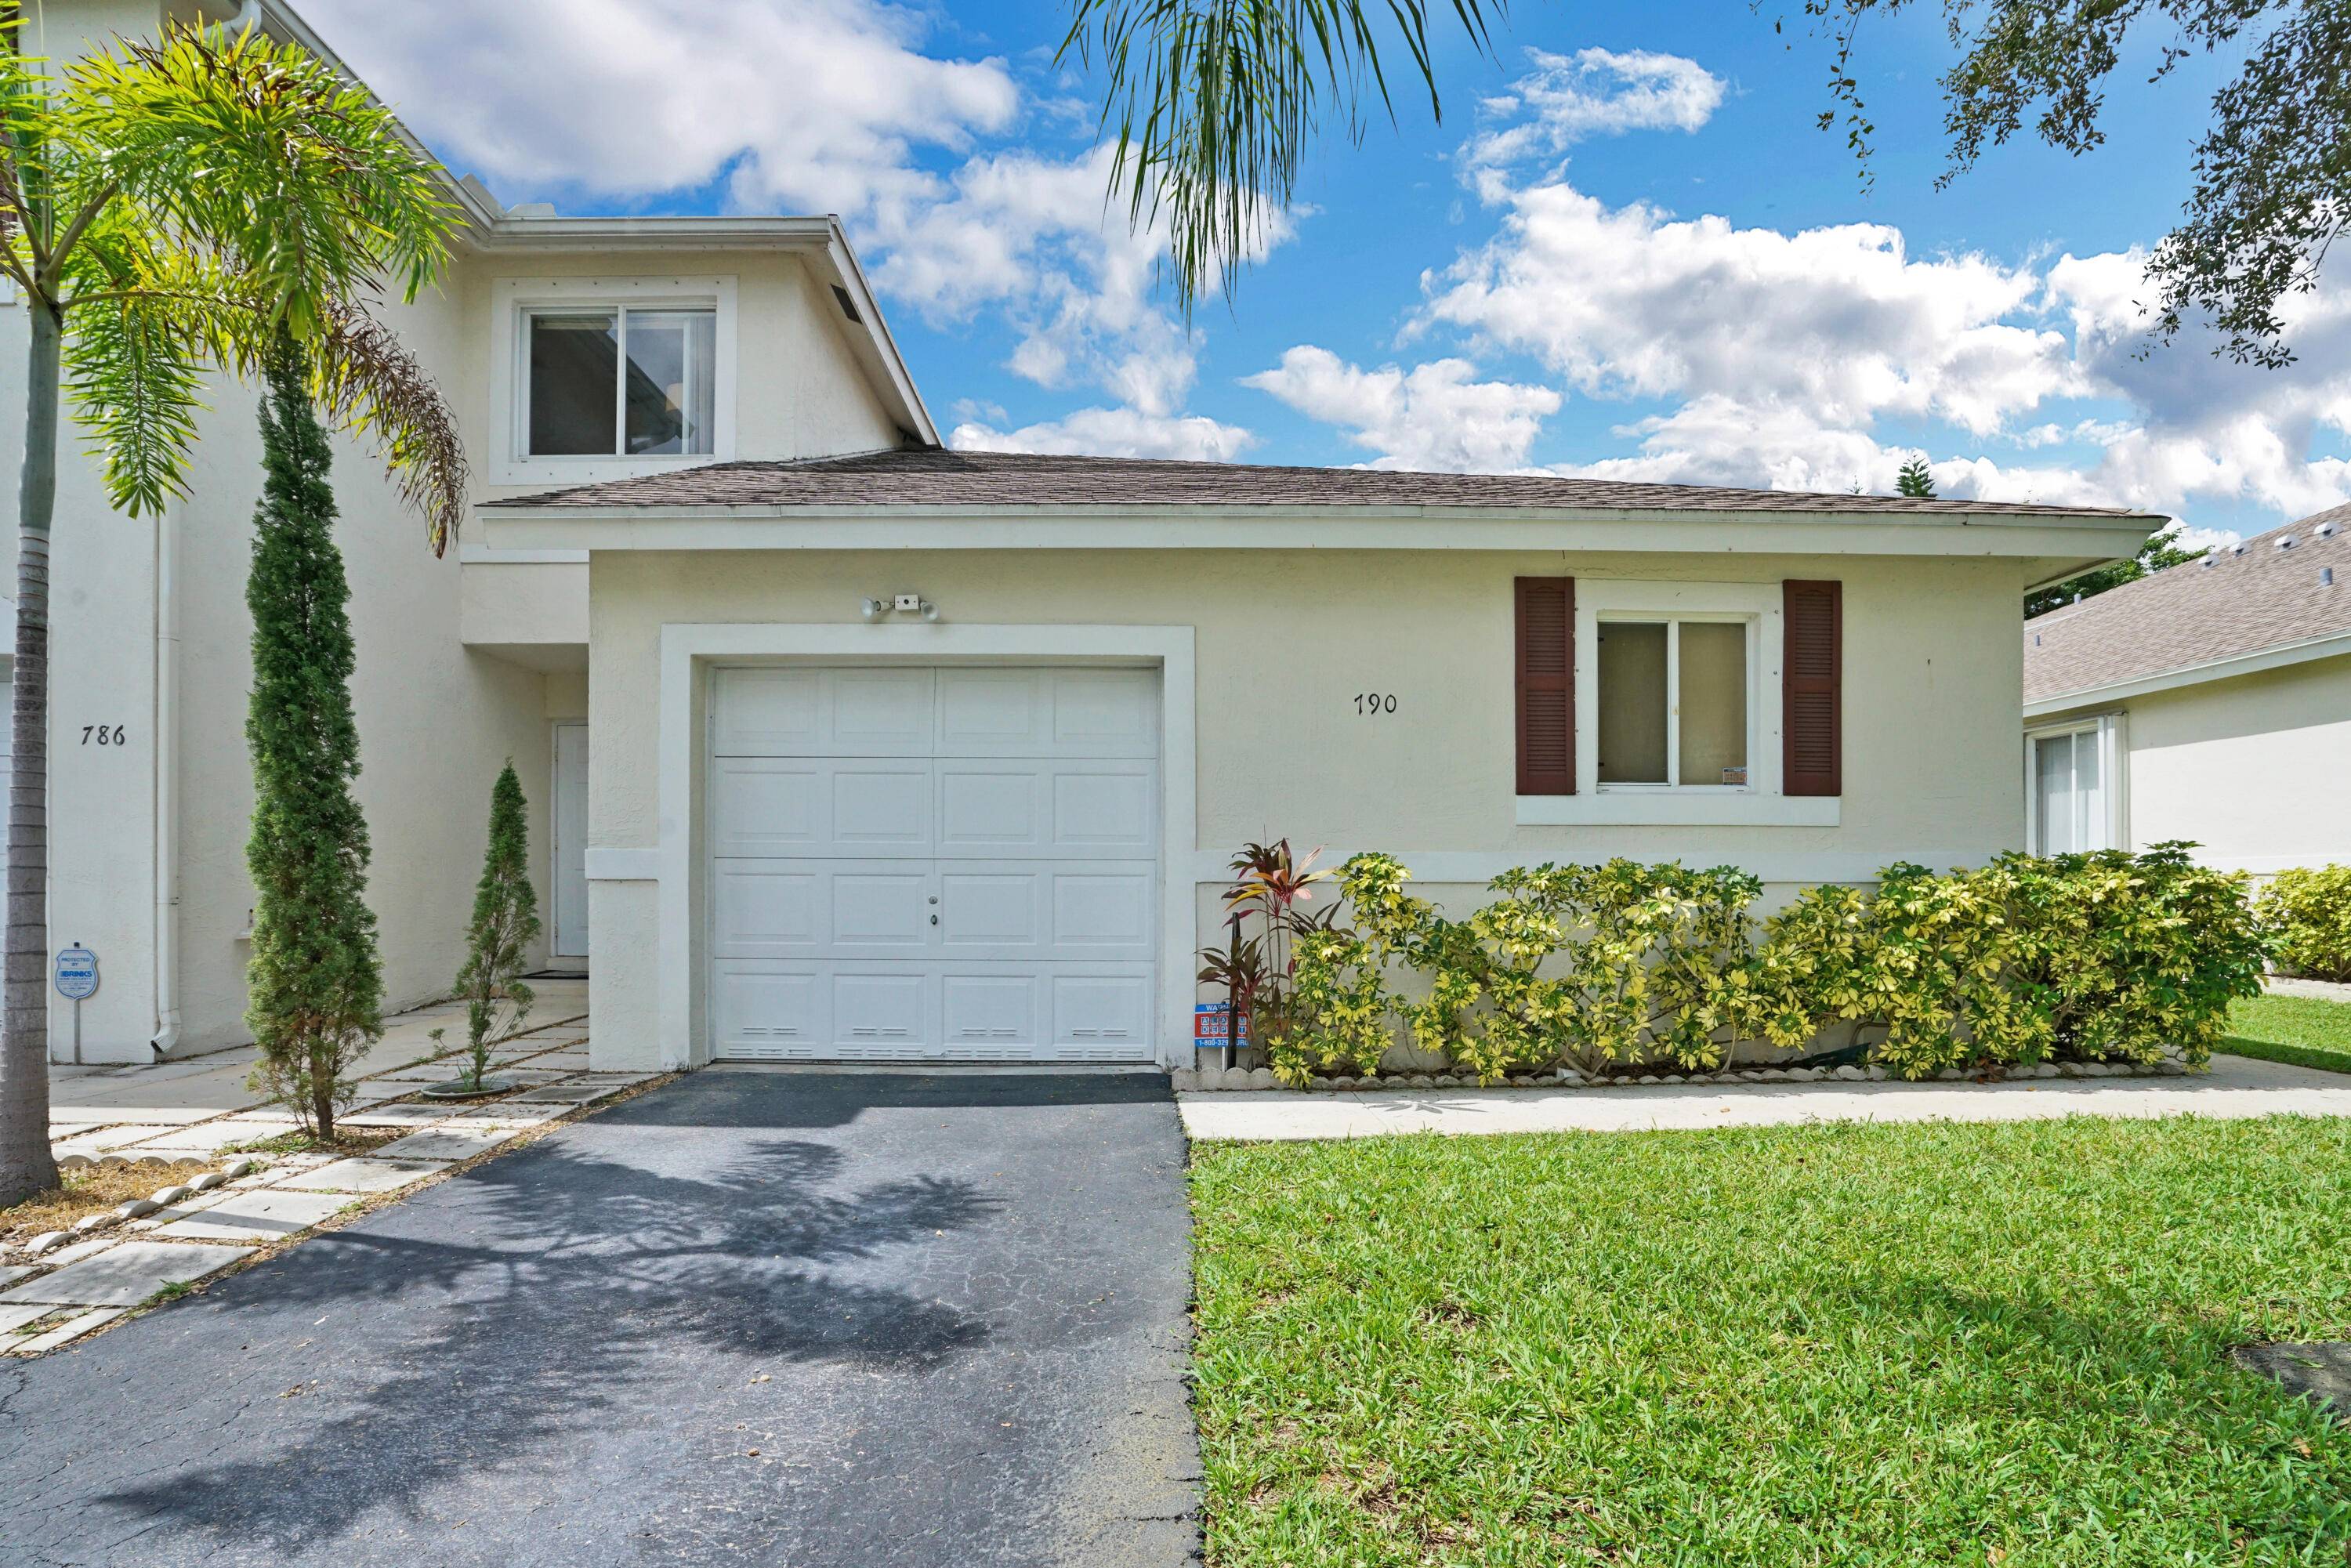 Beautiful, bright, spacious 2bedroom 2bathroom Corner Villa with 1 Car attached garage located in desirable Deerfield Beach.